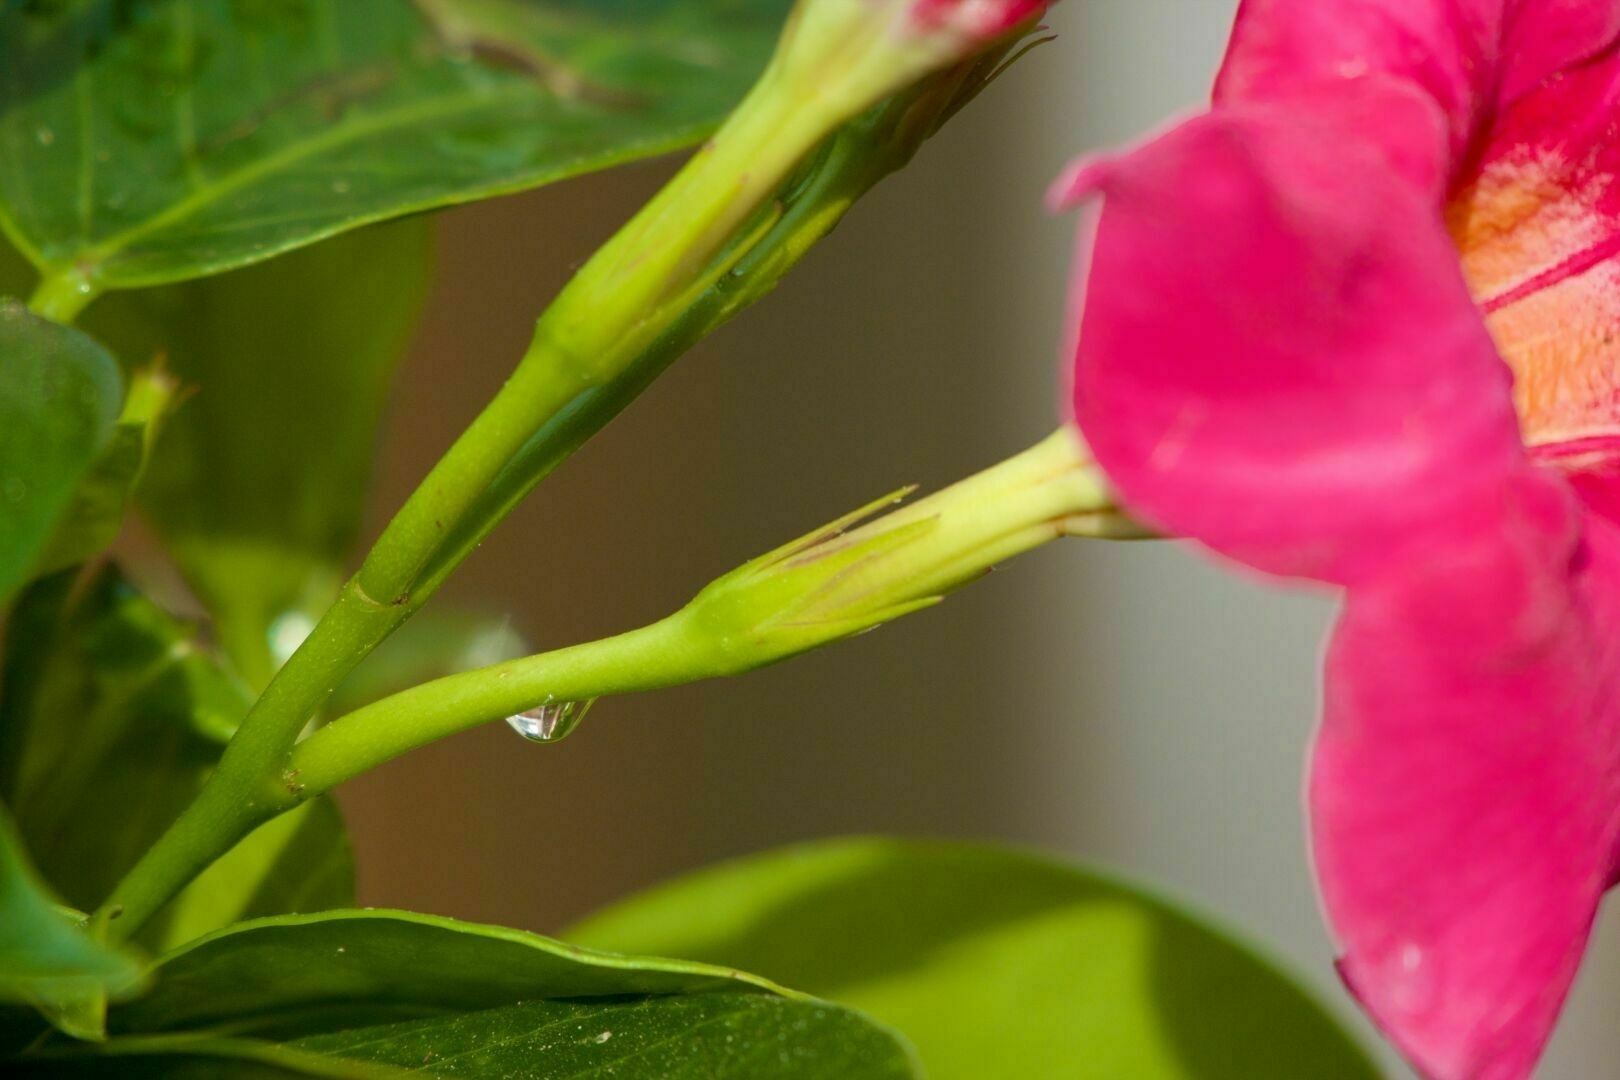 A drop of water hangs from a plant. The beginning of a pink flower can be seen on the right, while the rest of the picture shows green stems and leaves in the sun.